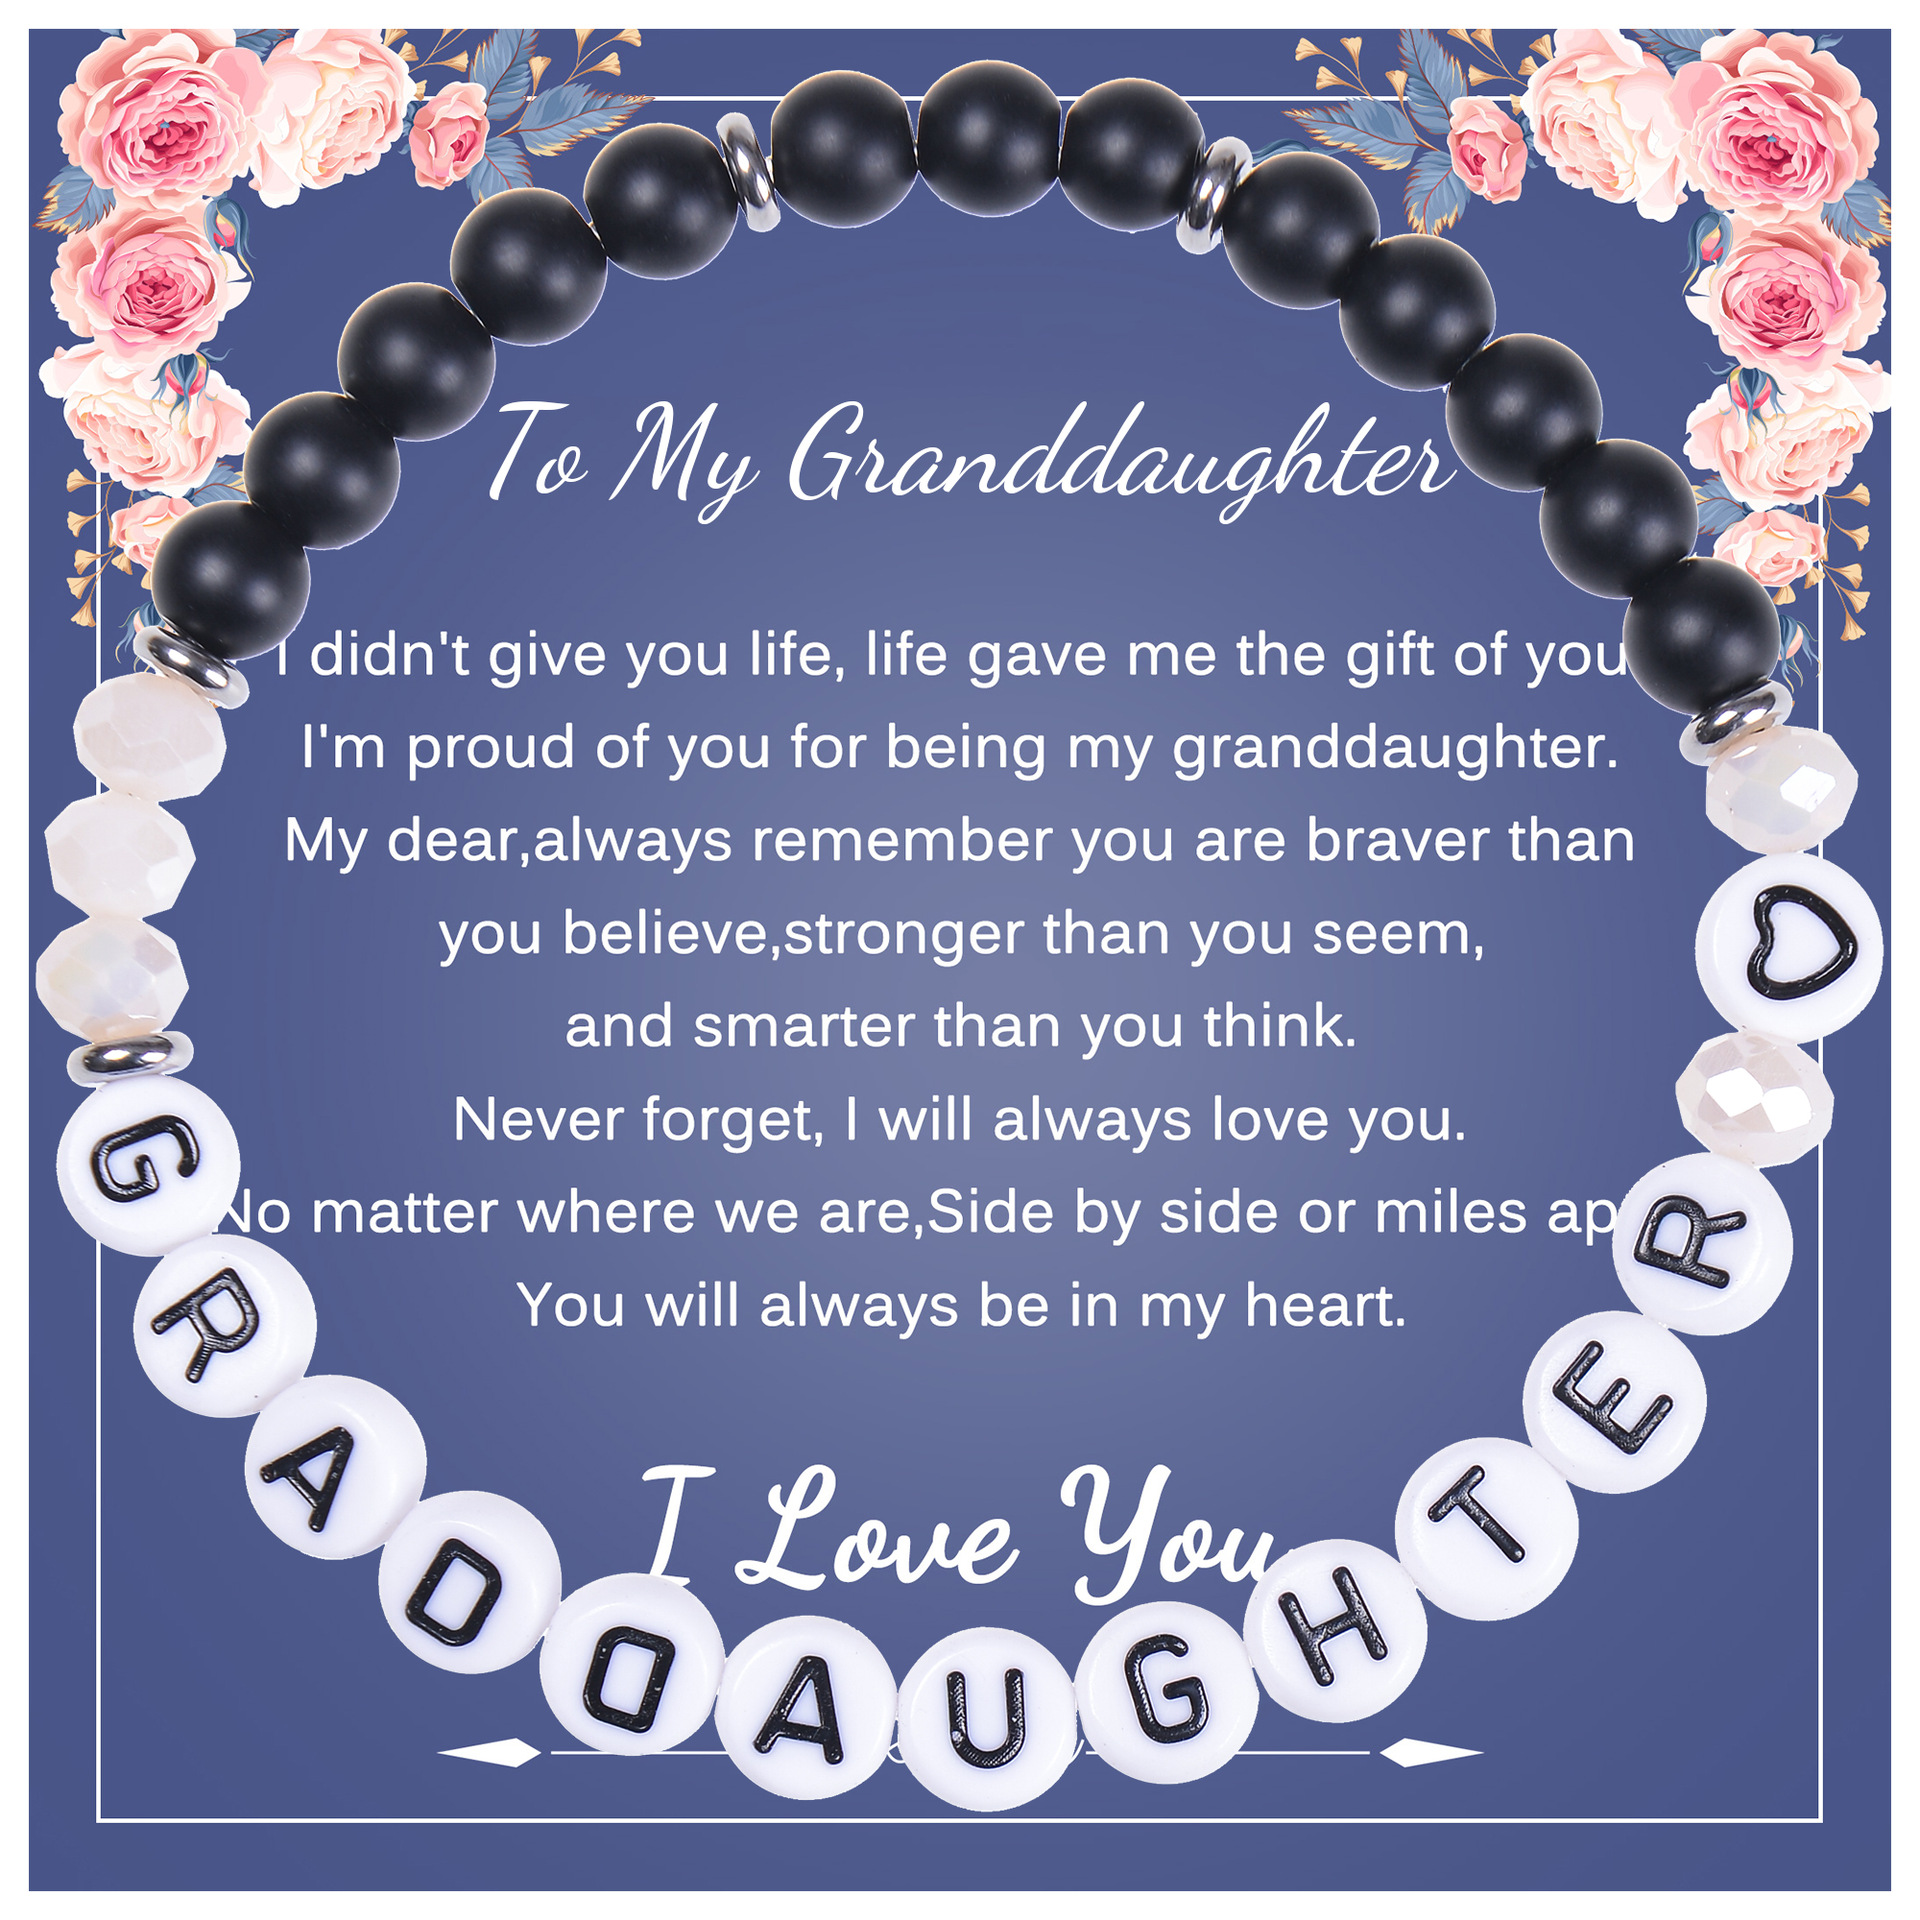 5:To My Granddaughter